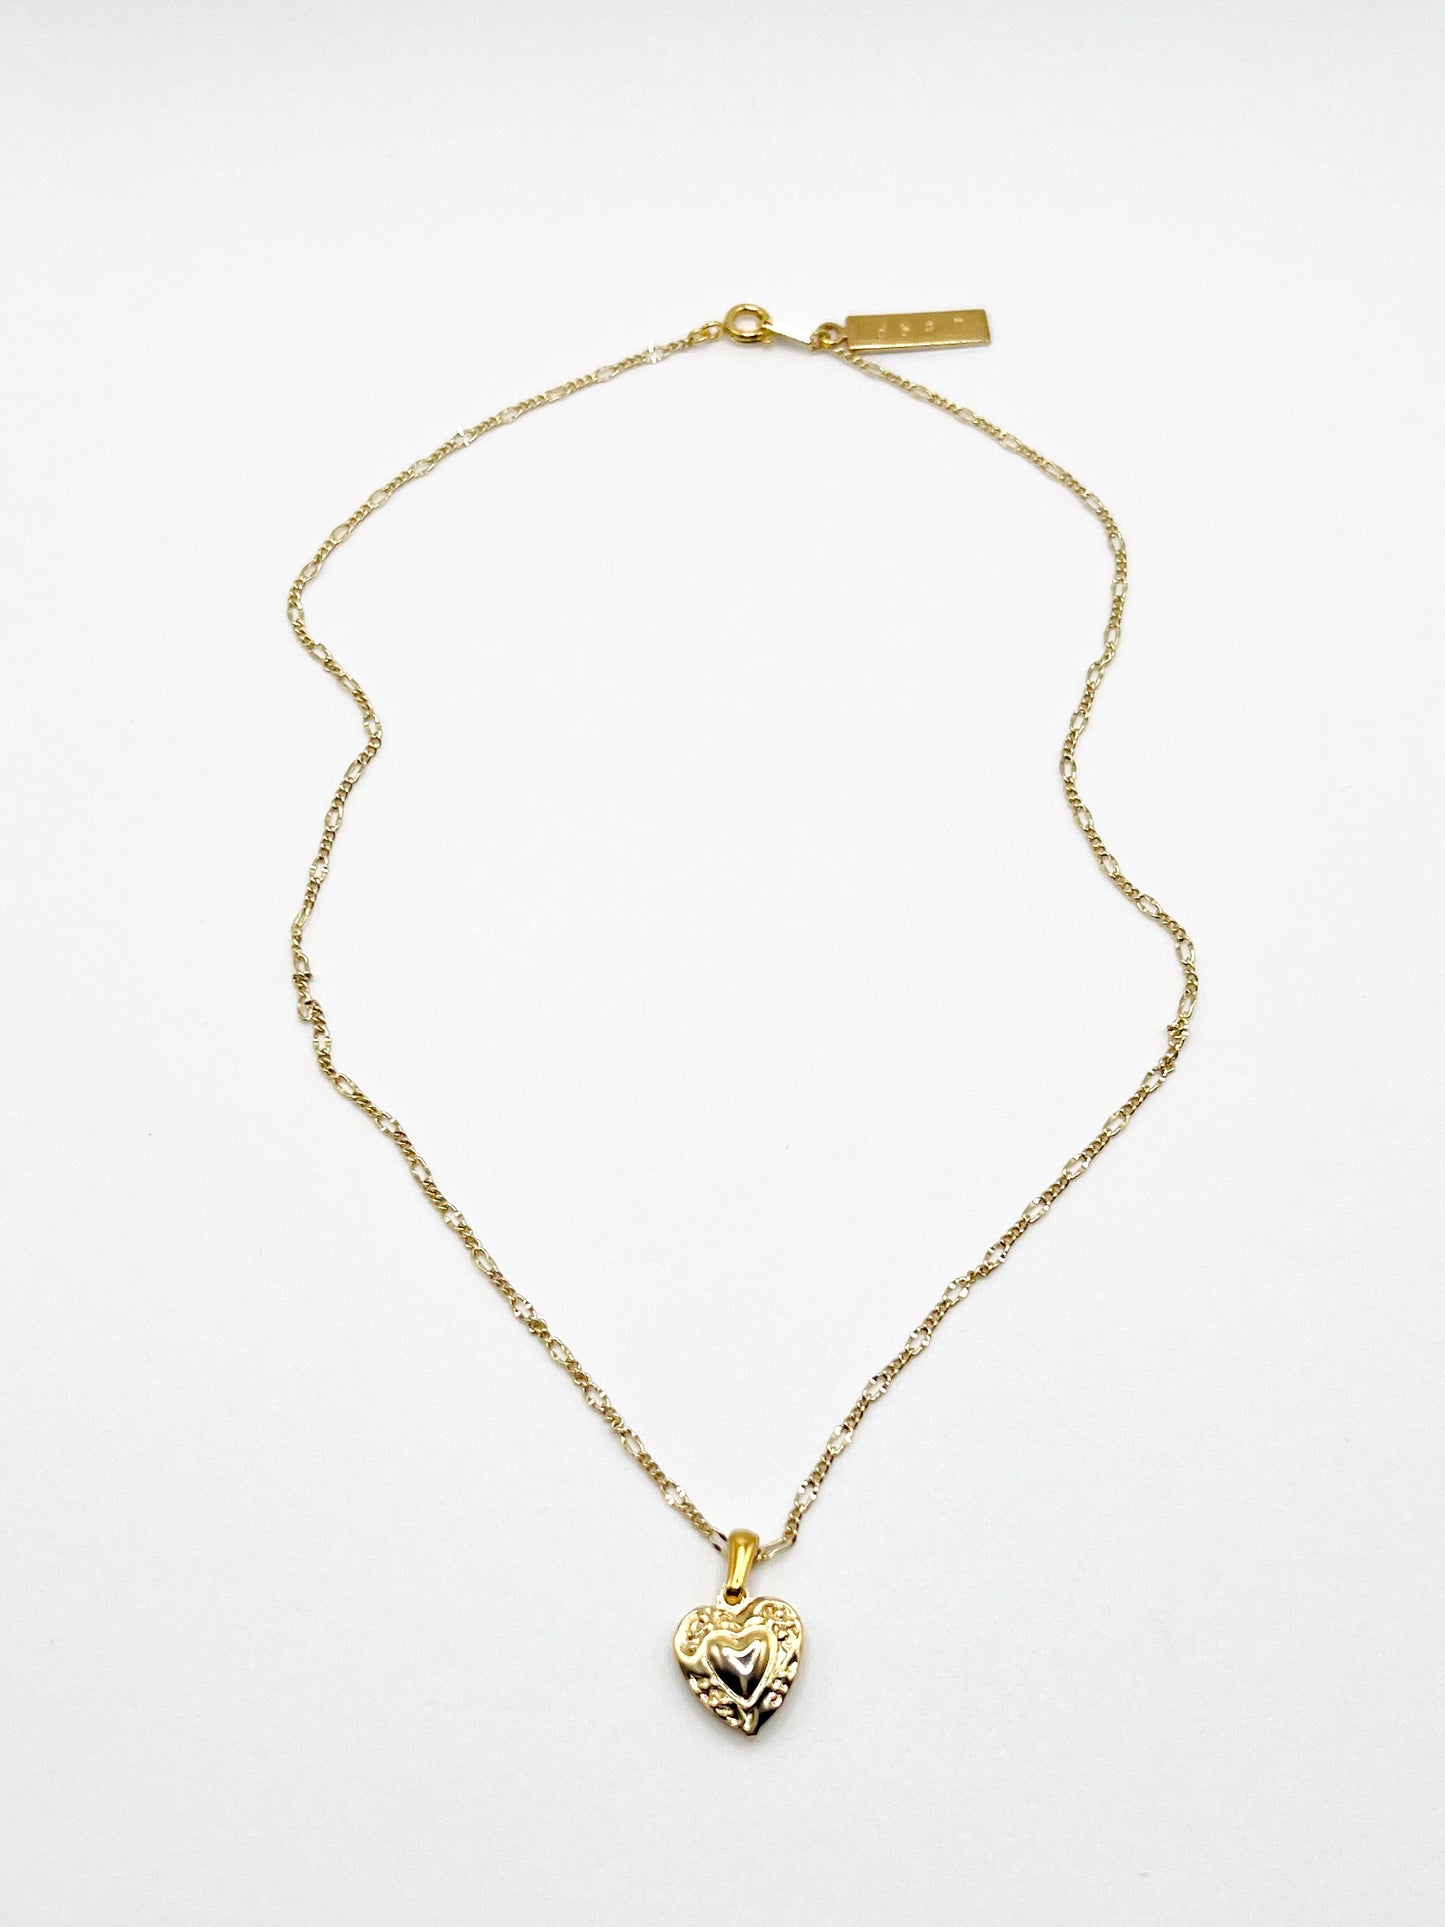 NW heart motif necklace - Gold